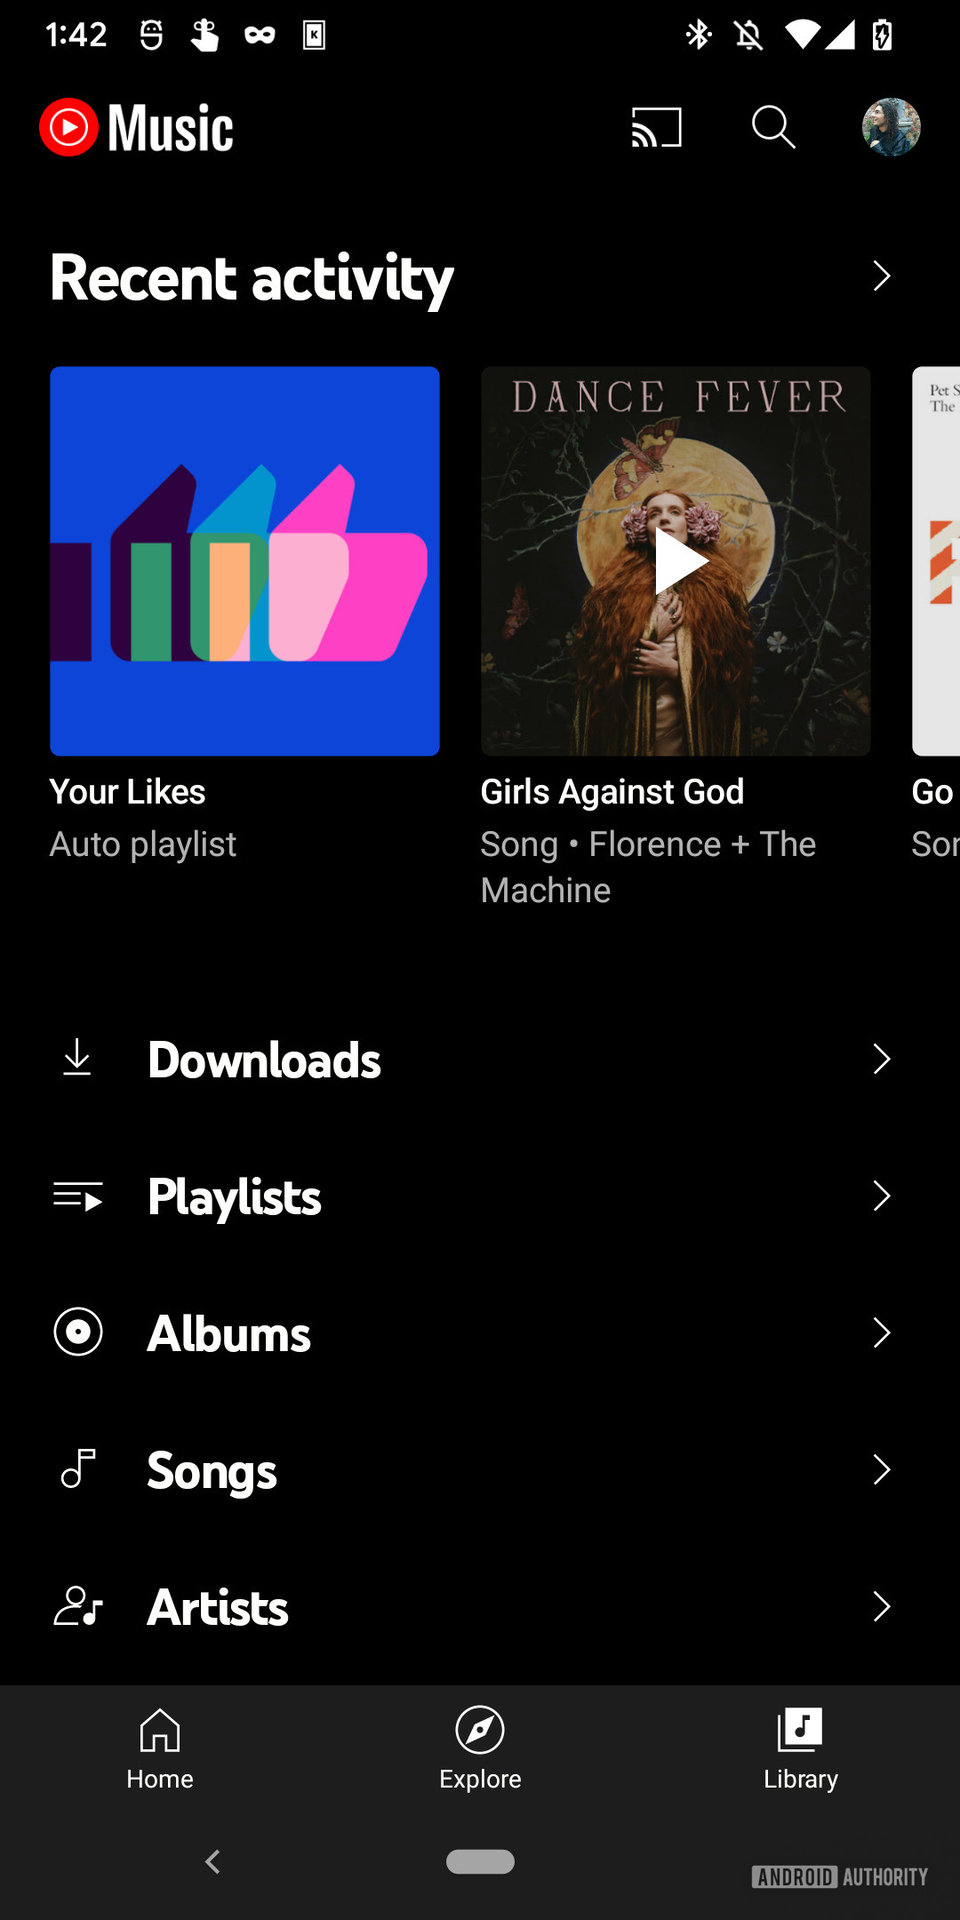 A screenshot of the YouTube Music app with a Premium subscription showing the "Library" tab with Downloads, Playlists, Albums, Songs, and Artists visible.